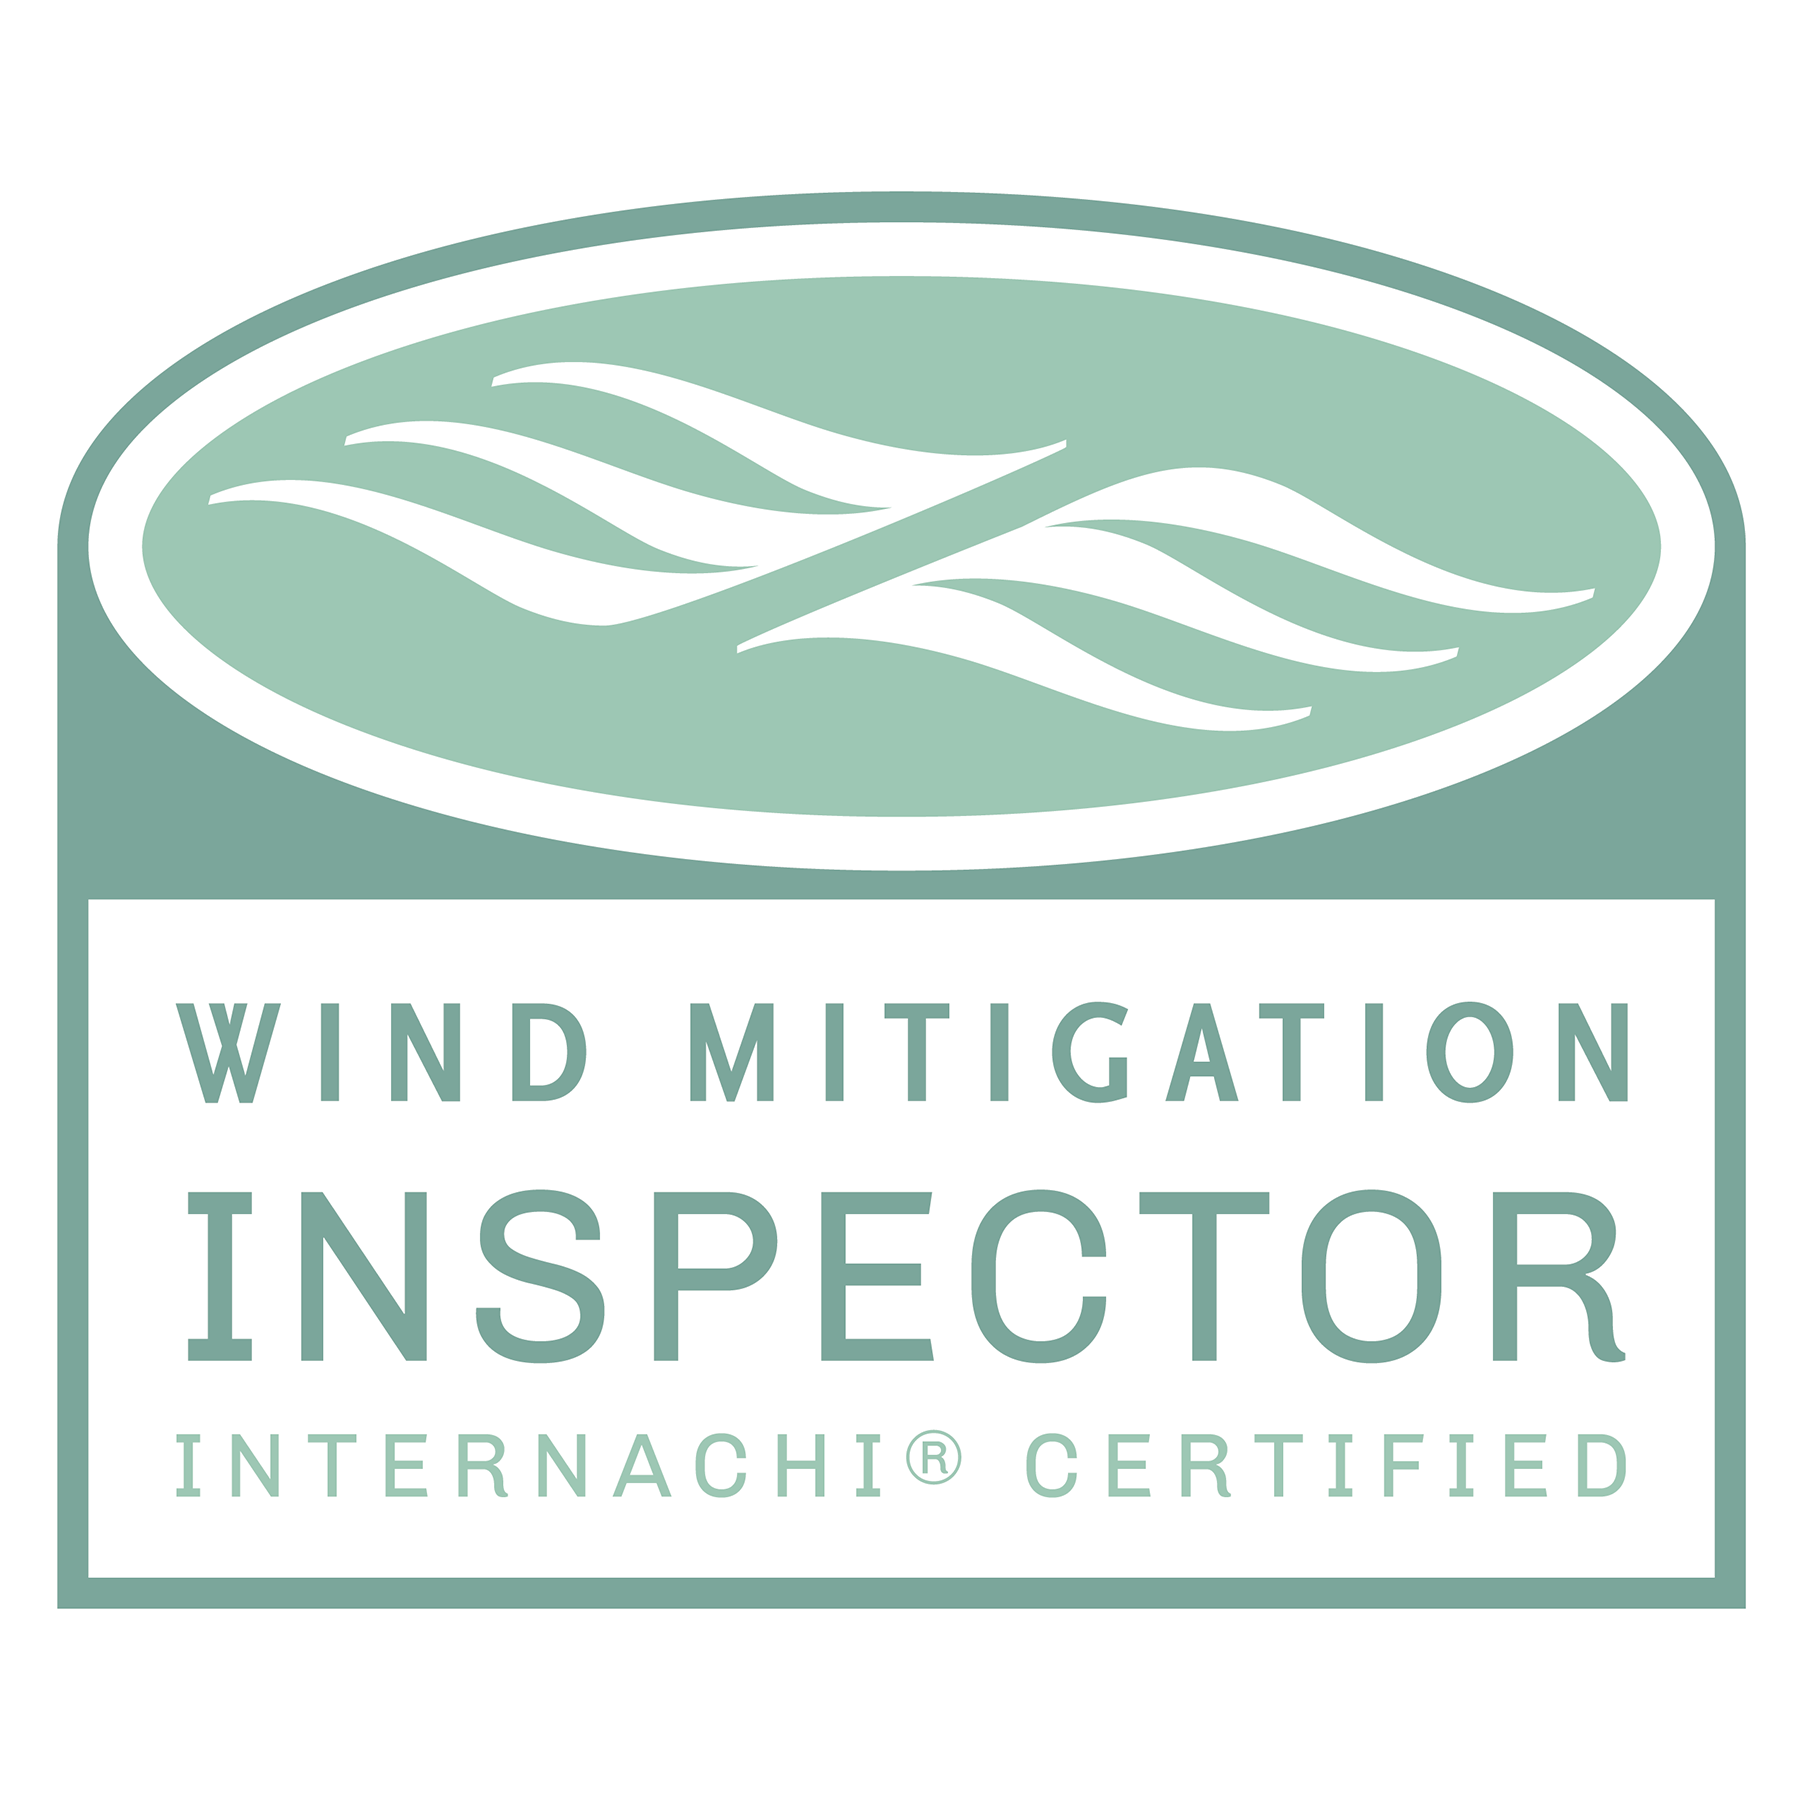 Wind Mitigation Inspection, home inspection florida, find a home inspector florida, what to expect during a home inspection florida, what are the most important things to look for during a home inspection florida, cost of home inspection florida, how to find a qualified home inspector florida, steps involved in getting a home inspection florida, tips for preparing for a home inspection florida, home inspector near me, home inspector in Weston Florida, wind mitigation inspection cost weston fl, wind mitigation inspection checklist weston fl, wind mitigation inspection services weston fl, wind mitigation inspection near me weston fl, wind mitigation inspection guide weston fl, wind mitigation inspection benefits weston fl, wind mitigation inspection importance weston fl, wind mitigation inspection what to expect weston fl, hurricane wind mitigation inspection weston fl, hurricane resistant home inspection weston fl, hurricane proof home inspection weston fl, hurricane safe home inspection weston fl, wind resistant home inspection weston fl, wind proof home inspection weston fl, wind safe home inspection weston fl, wind mitigation inspection Weston FL, wind mitigation inspection cost Weston FL, wind mitigation inspection near me Weston FL, wind mitigation inspection benefits Weston FL, wind mitigation inspection requirements Weston FL, wind mitigation inspection discounts Weston FL, wind mitigation inspection form Weston FL, wind mitigation inspection companies Weston FL, wind mitigation inspection reviews Weston FL, windstorm mitigation inspection, hurricane protection inspection, wind damage inspection, hurricane resistant home inspection, hurricane shutters,